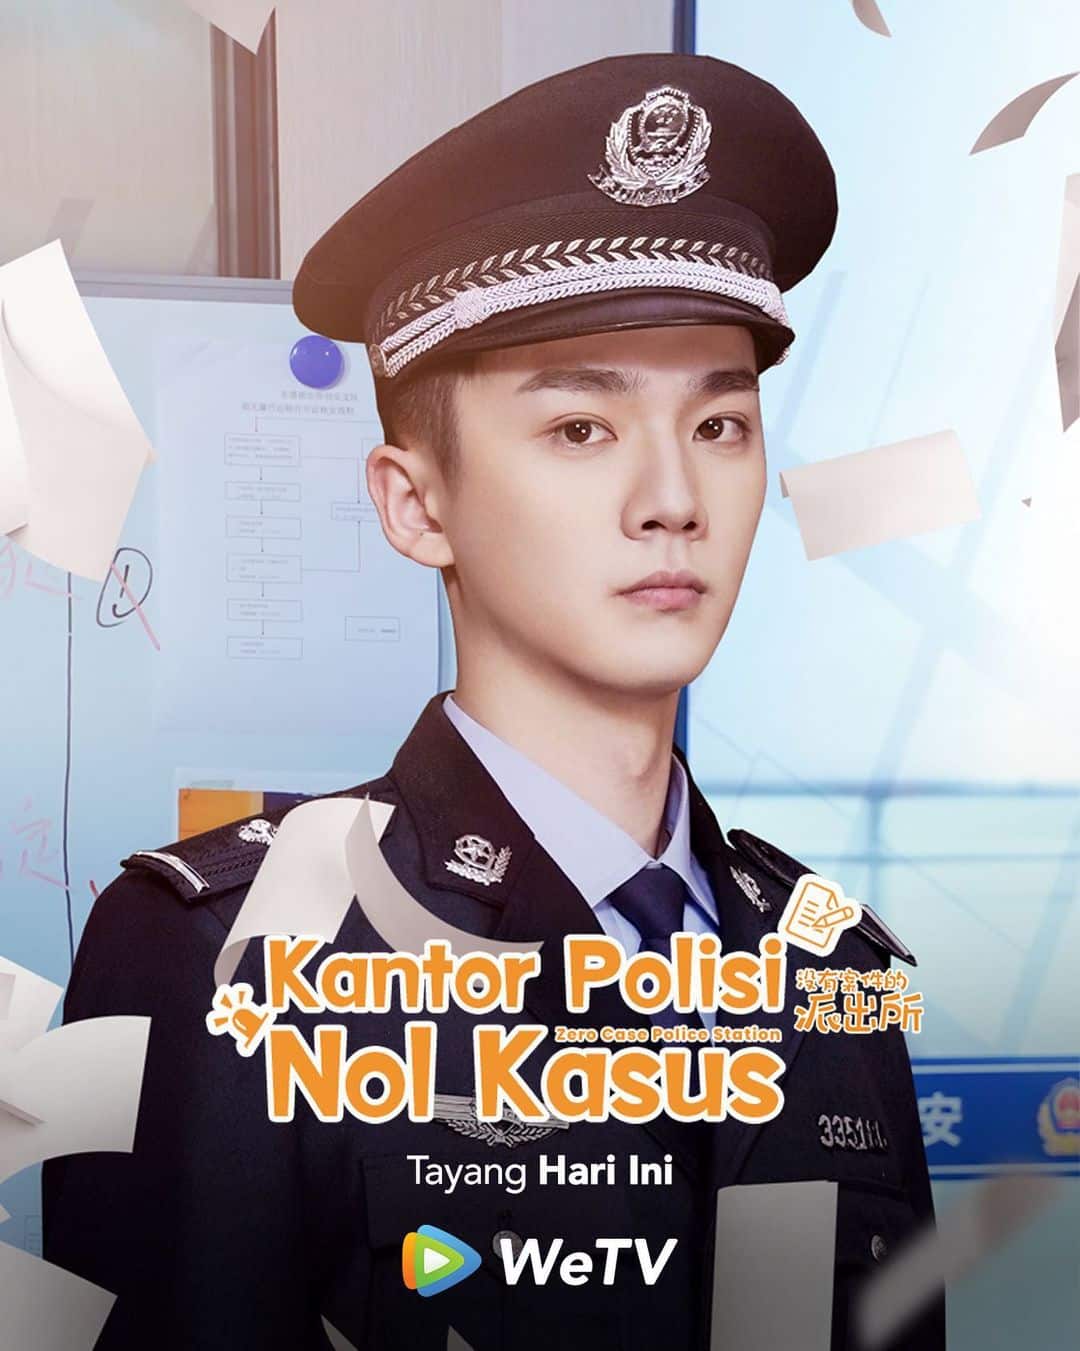 Zero Case Police Station - Sinopsis, Pemain, OST, Episode. Review